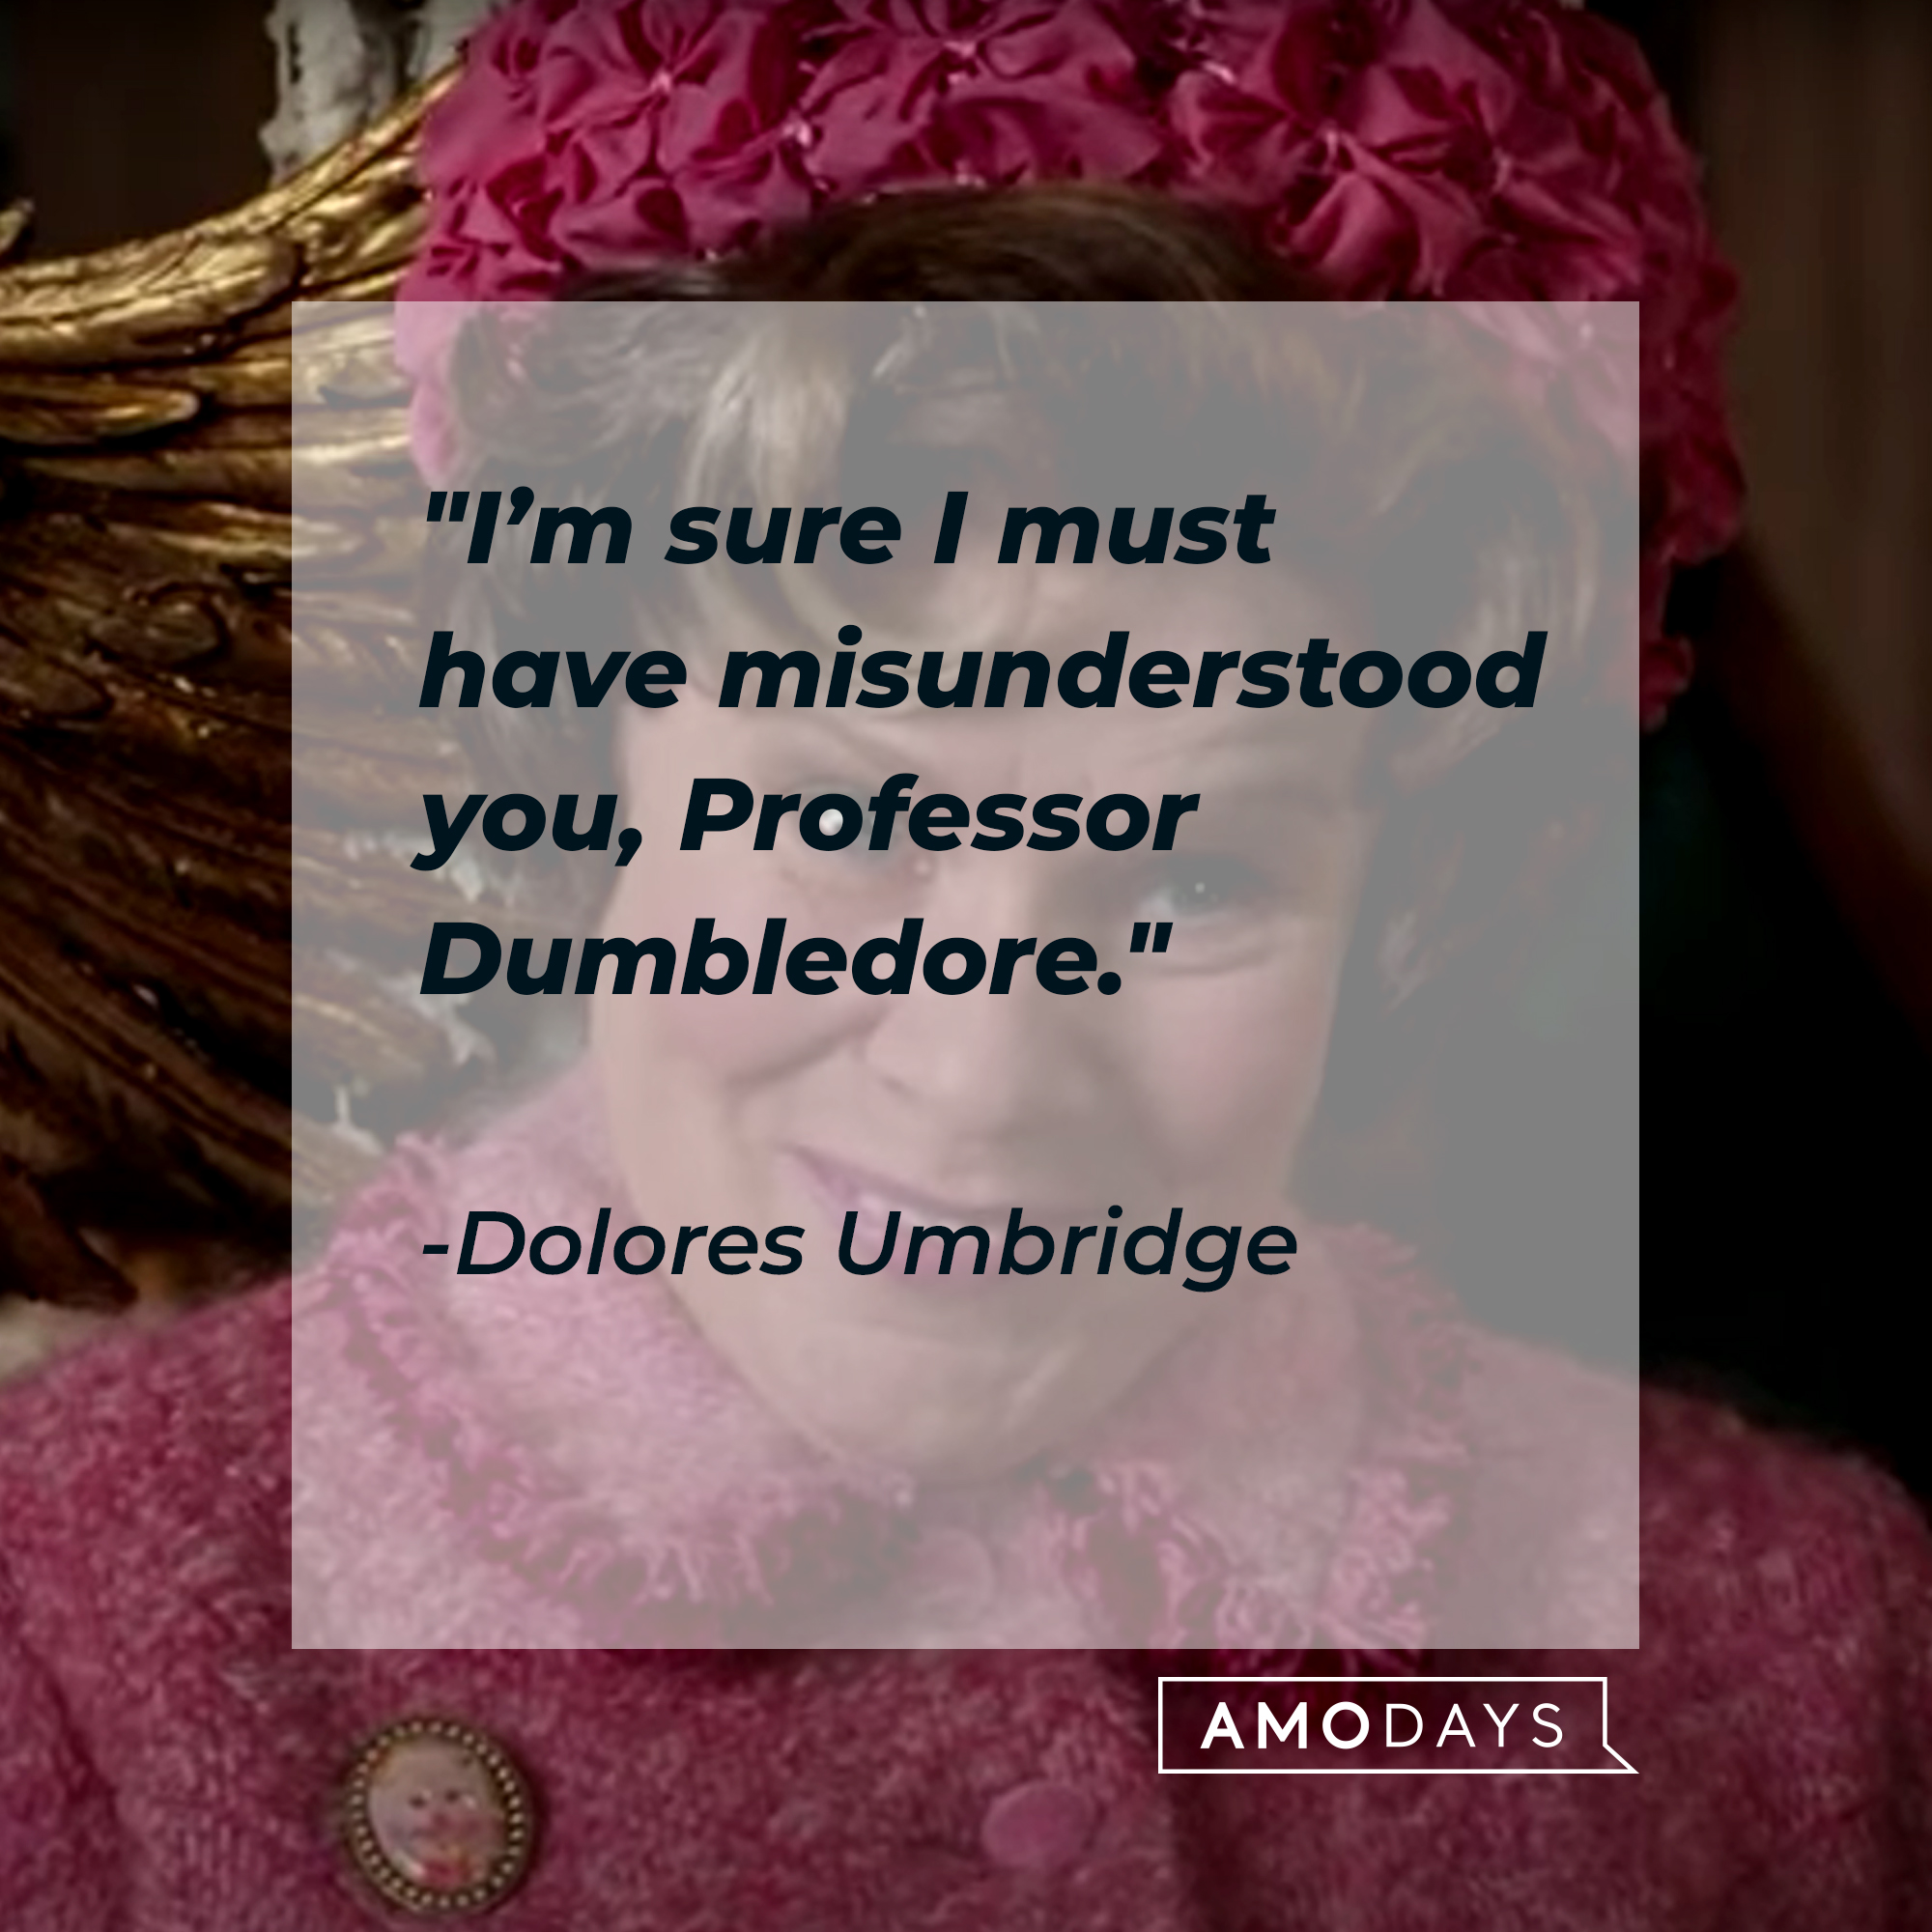 A photo of Dolores Umbridge with the quote, "I’m sure I must have misunderstood you, Professor Dumbledore." | Source: Facebook/harrypotter